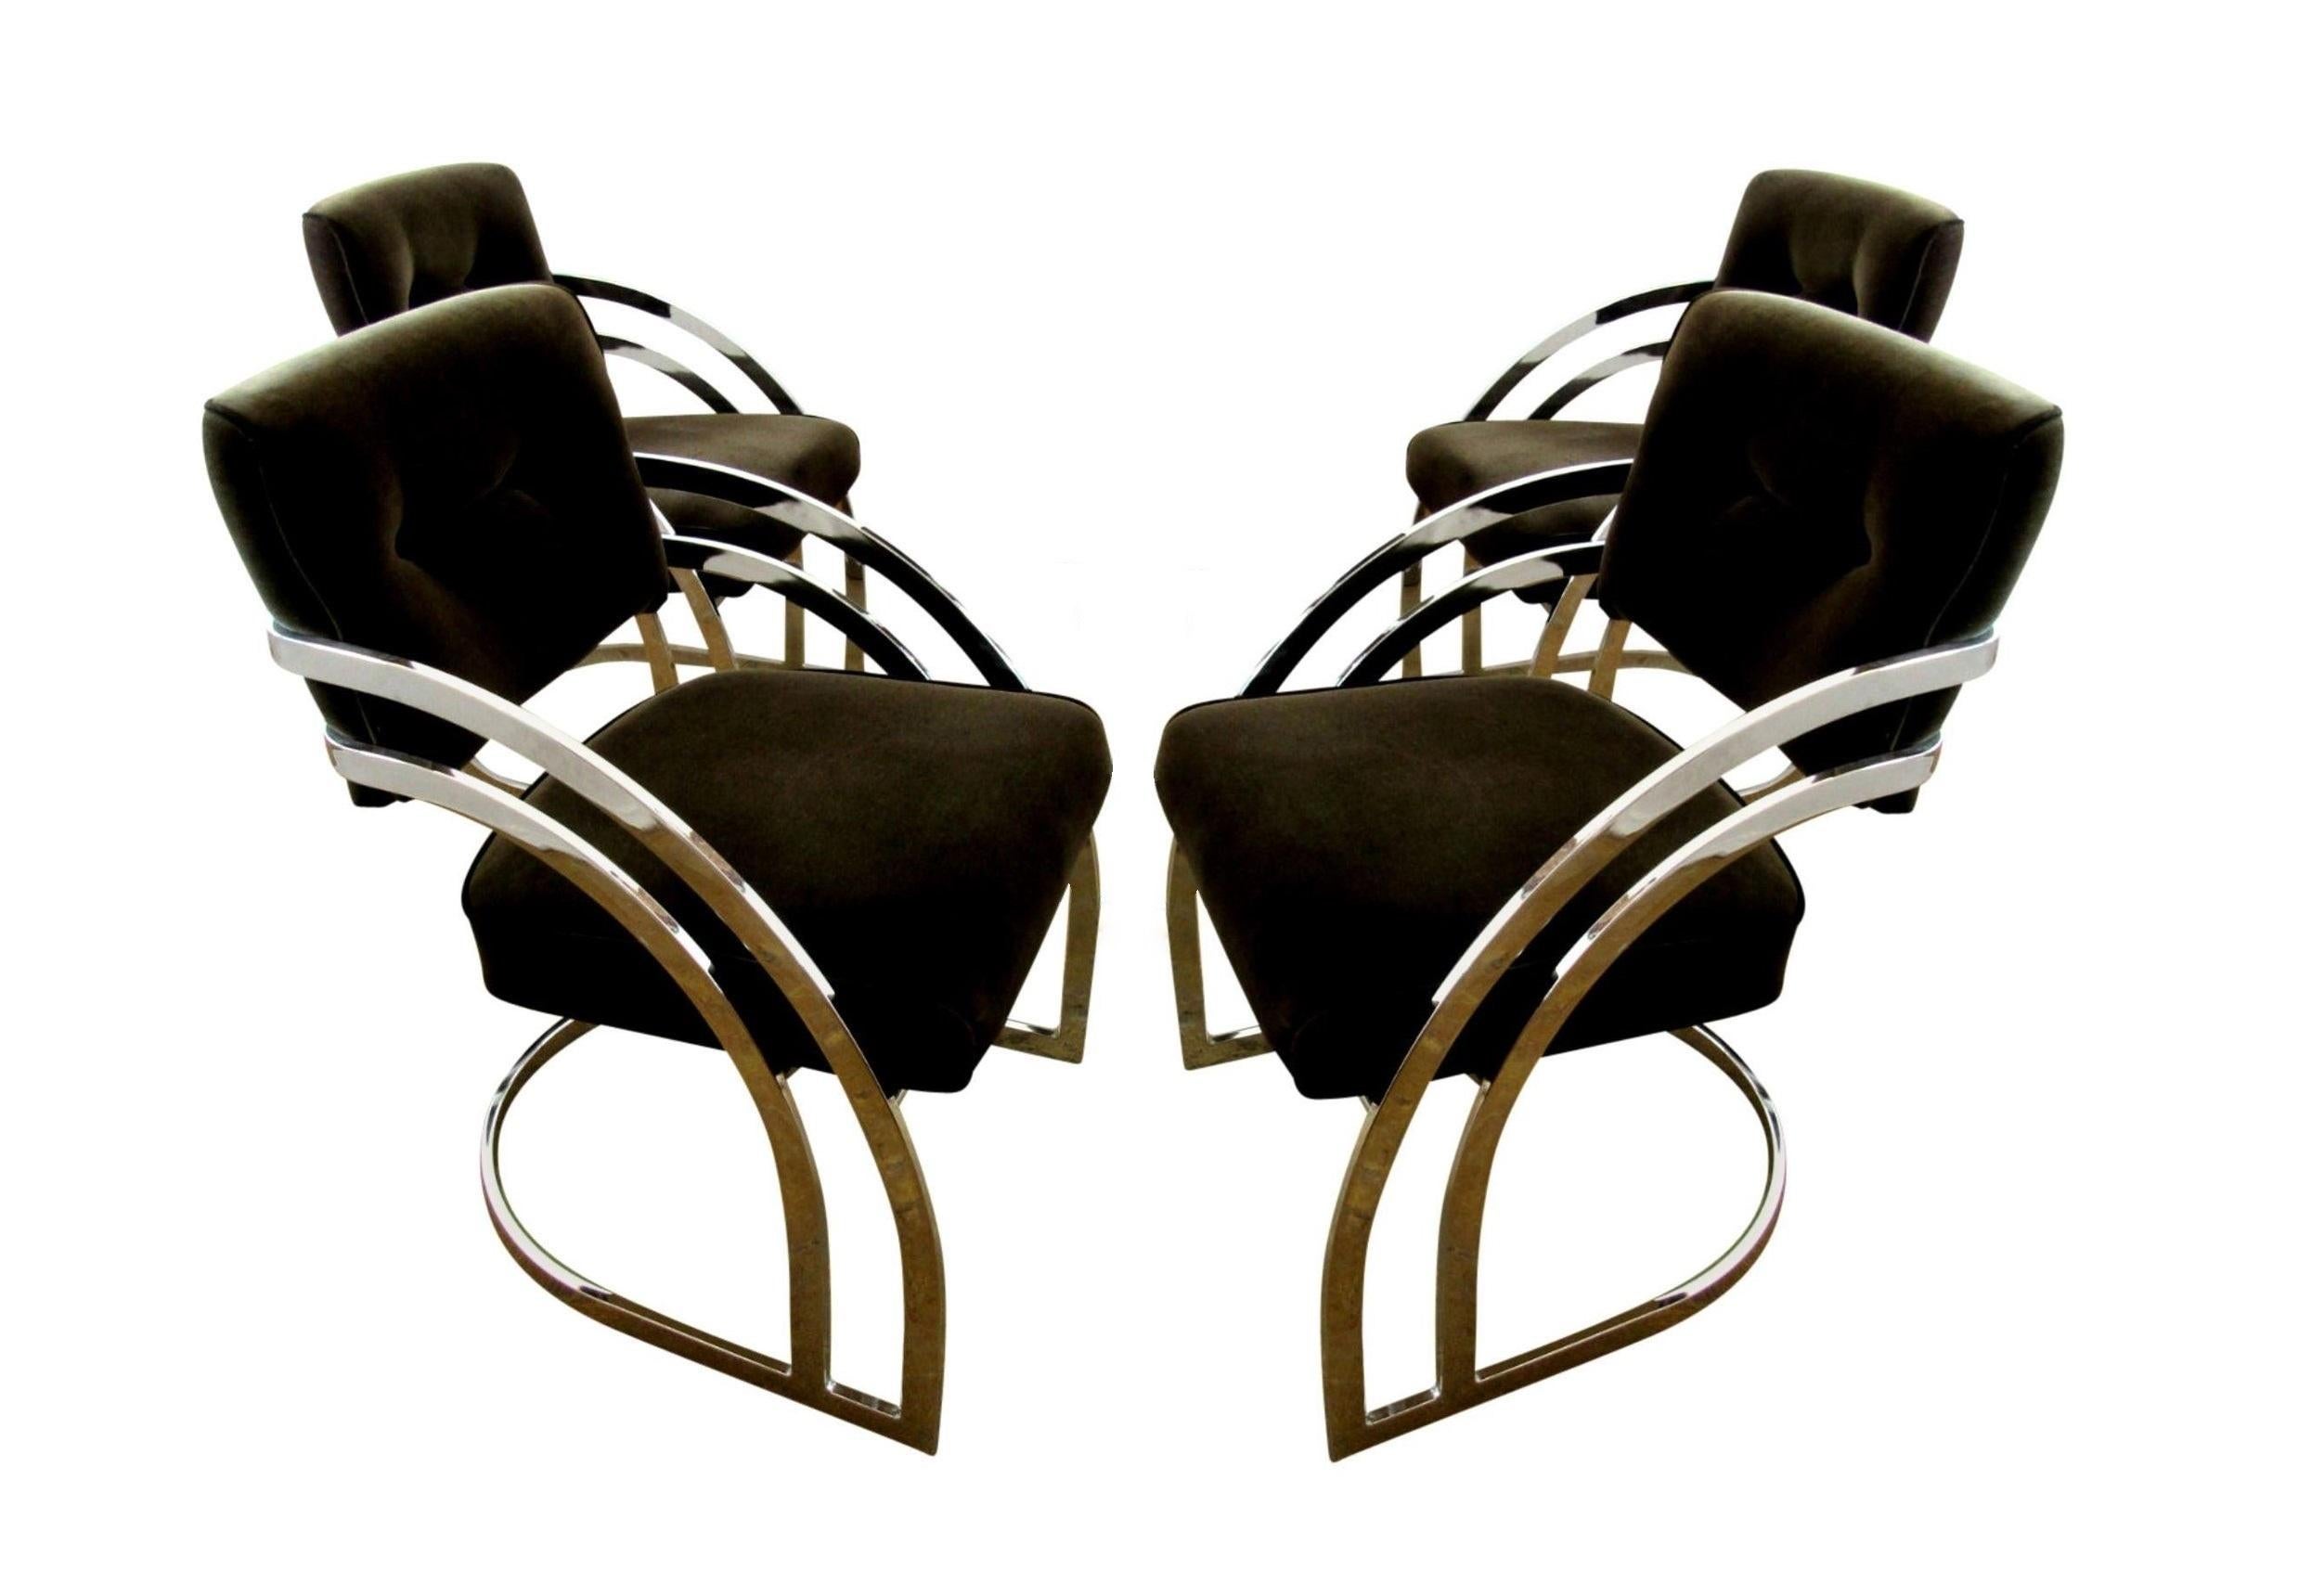 Killer chrome dining chairs in the manner of Milo Baughman. Professionally upholstered in a charcoal black colored velvet fabric provides a modern vibe with its chrome frames. The chair backs have a triple bar design and waterfall cantilevered